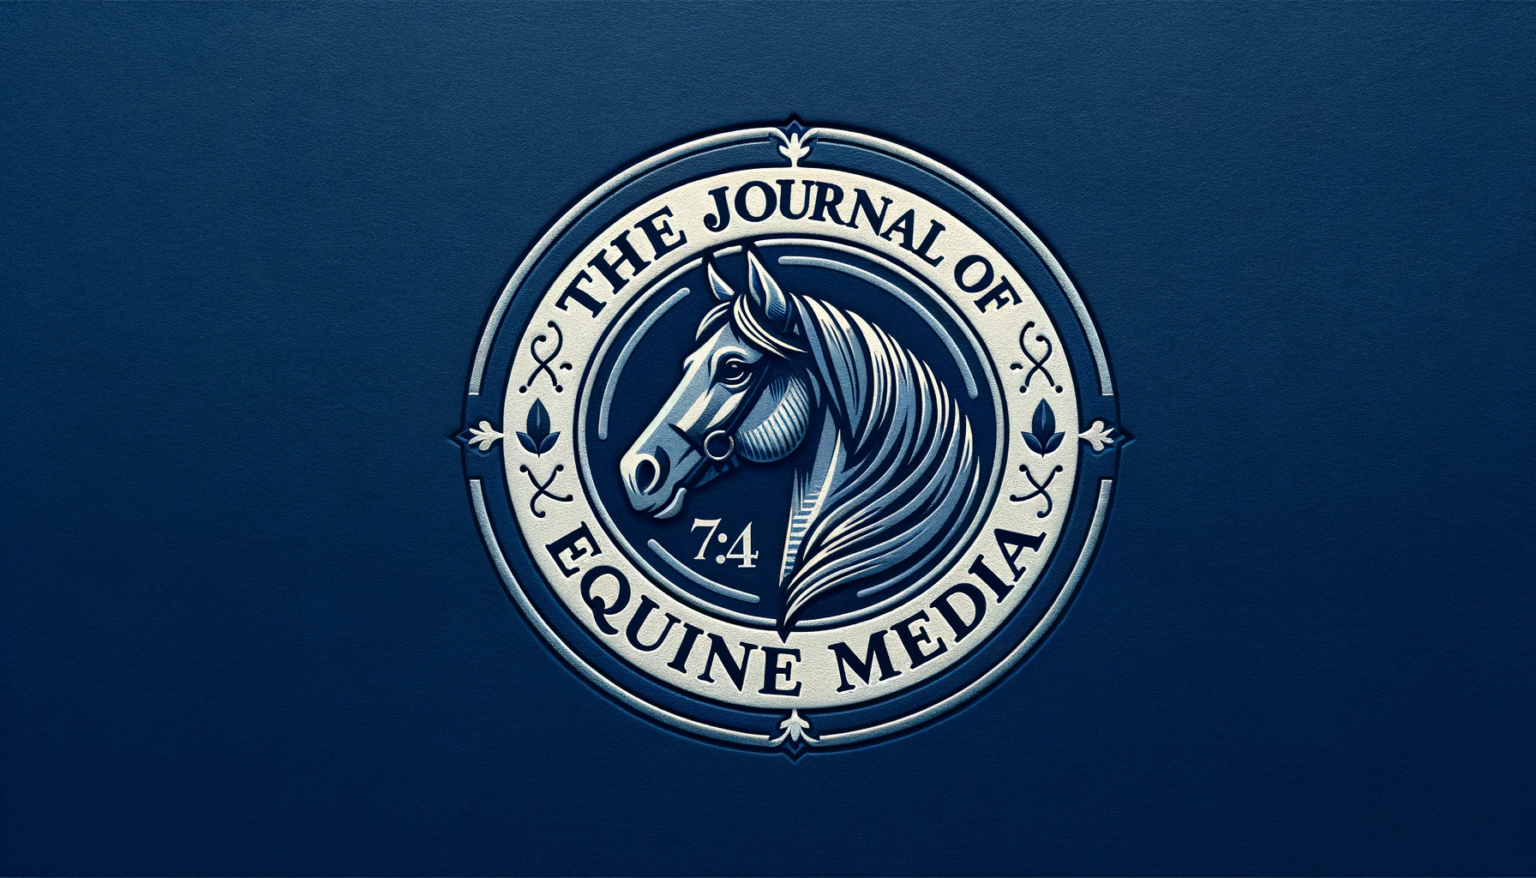 Elucidation of Equine Genetic Signatures within Podcast RSS Feeds: A Novel Examination of the Genomic Overlaps between Digital Media and Equidae Phenomena